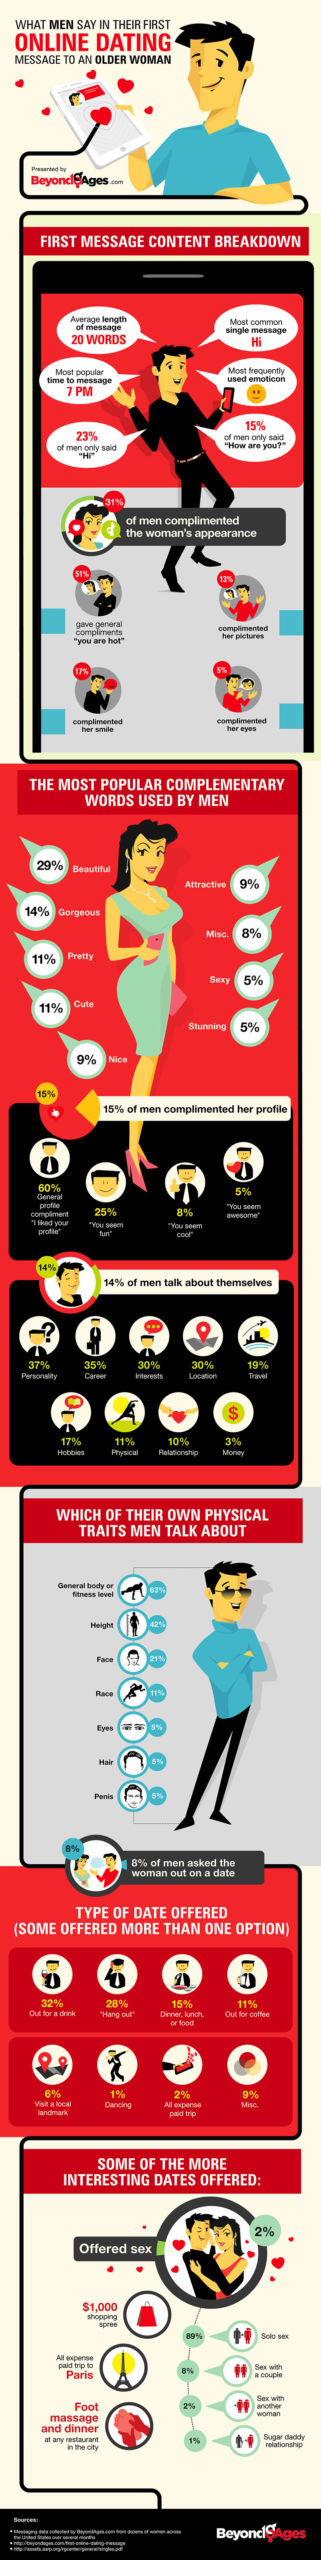 Infographic of what men say in their first online dating message